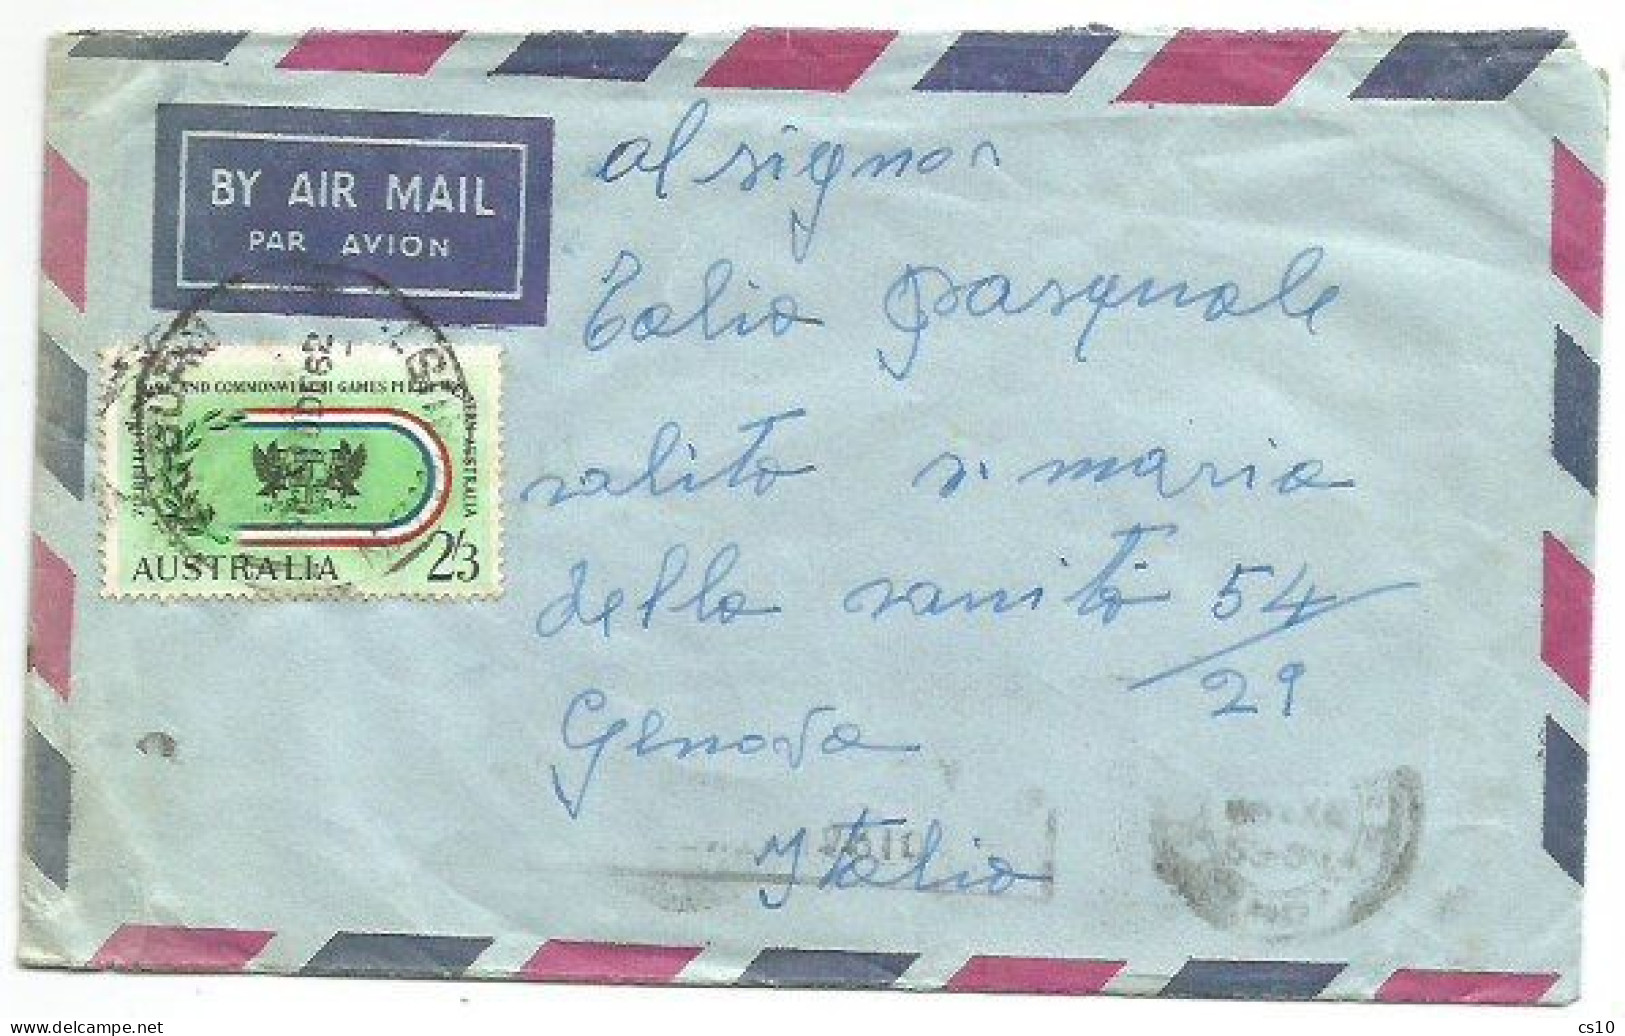 Australia Commonwealth Games 2S3 Solo Franking Airmail Cover Sidney 10dec1962 X Italy - Storia Postale